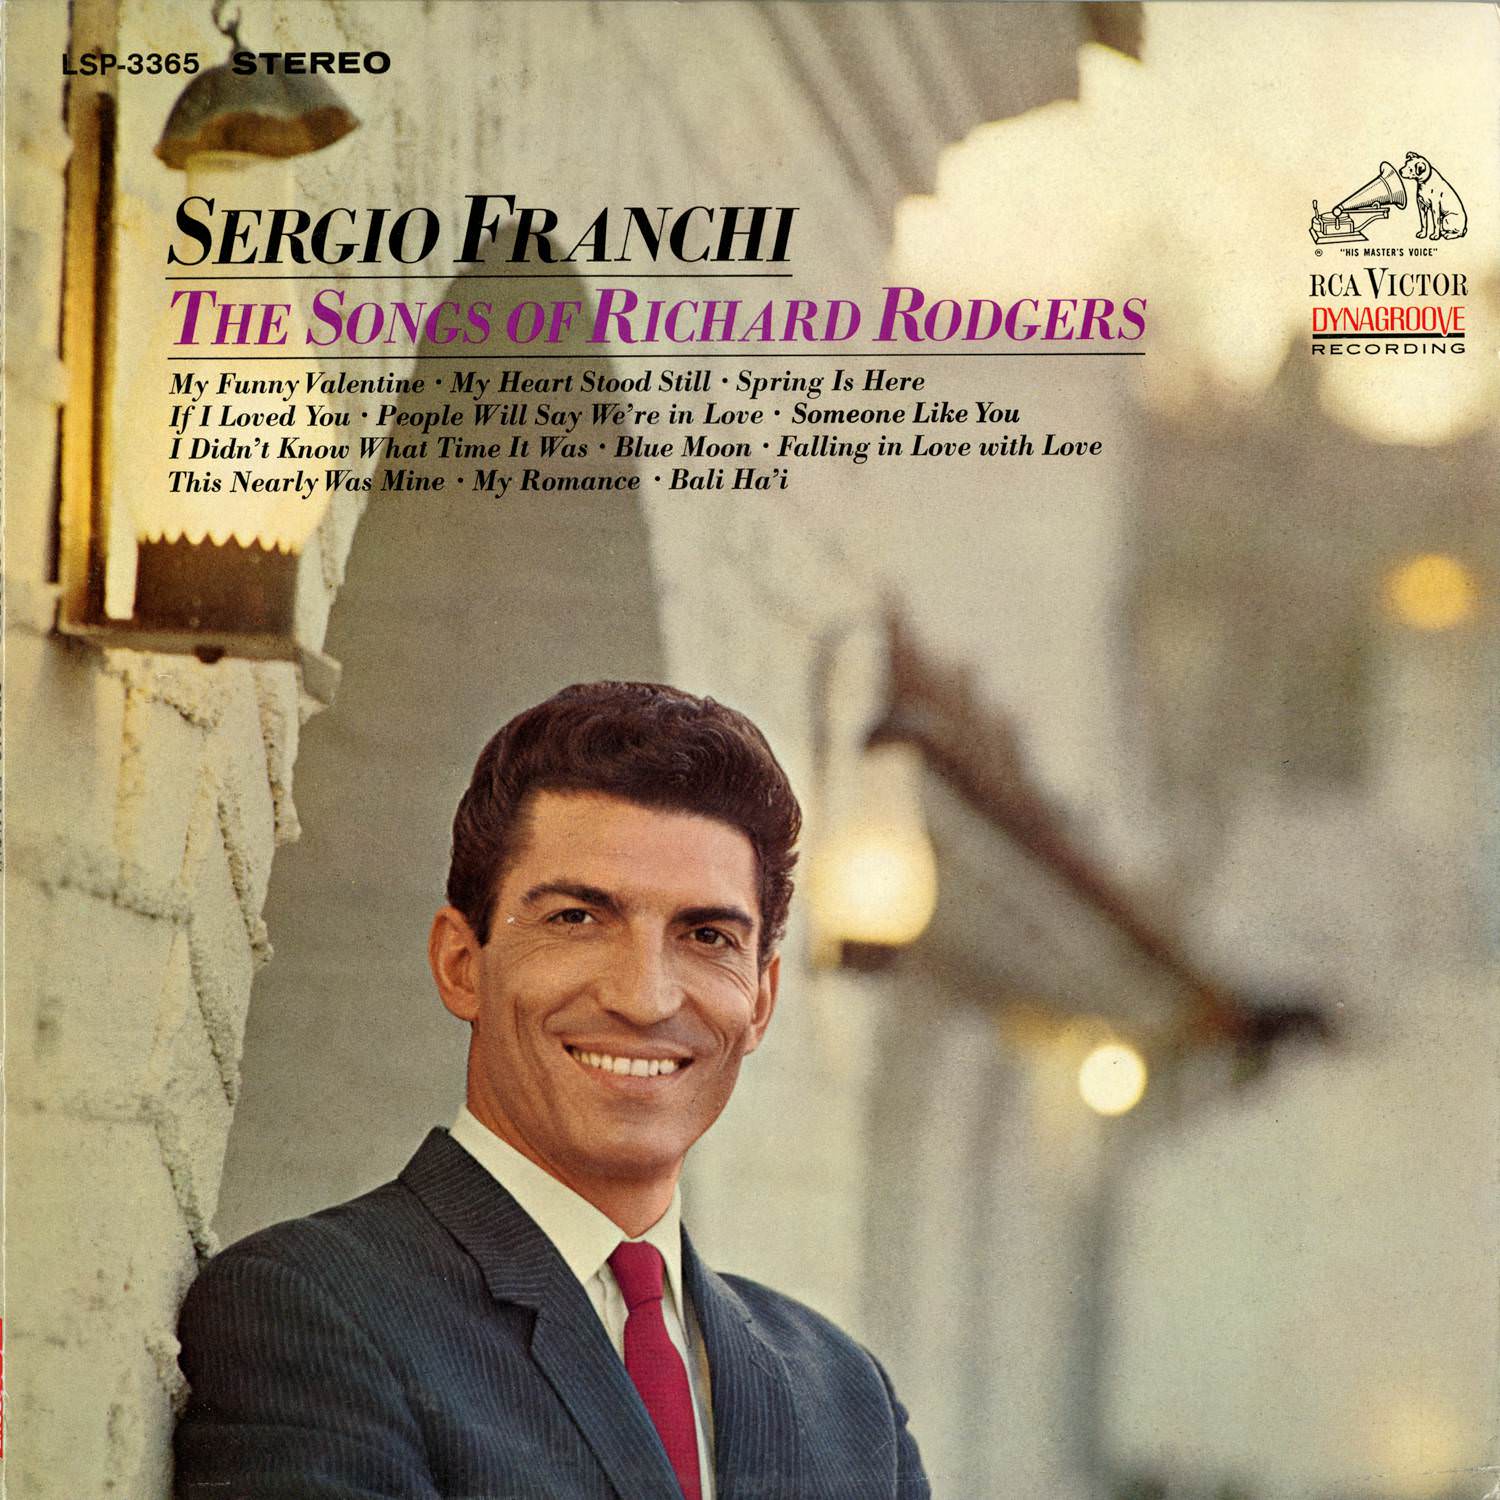 Sergio Franchi - The Songs Of Richard Rodgers (1965/2015) [AcousticSounds FLAC 24bit/96kHz]